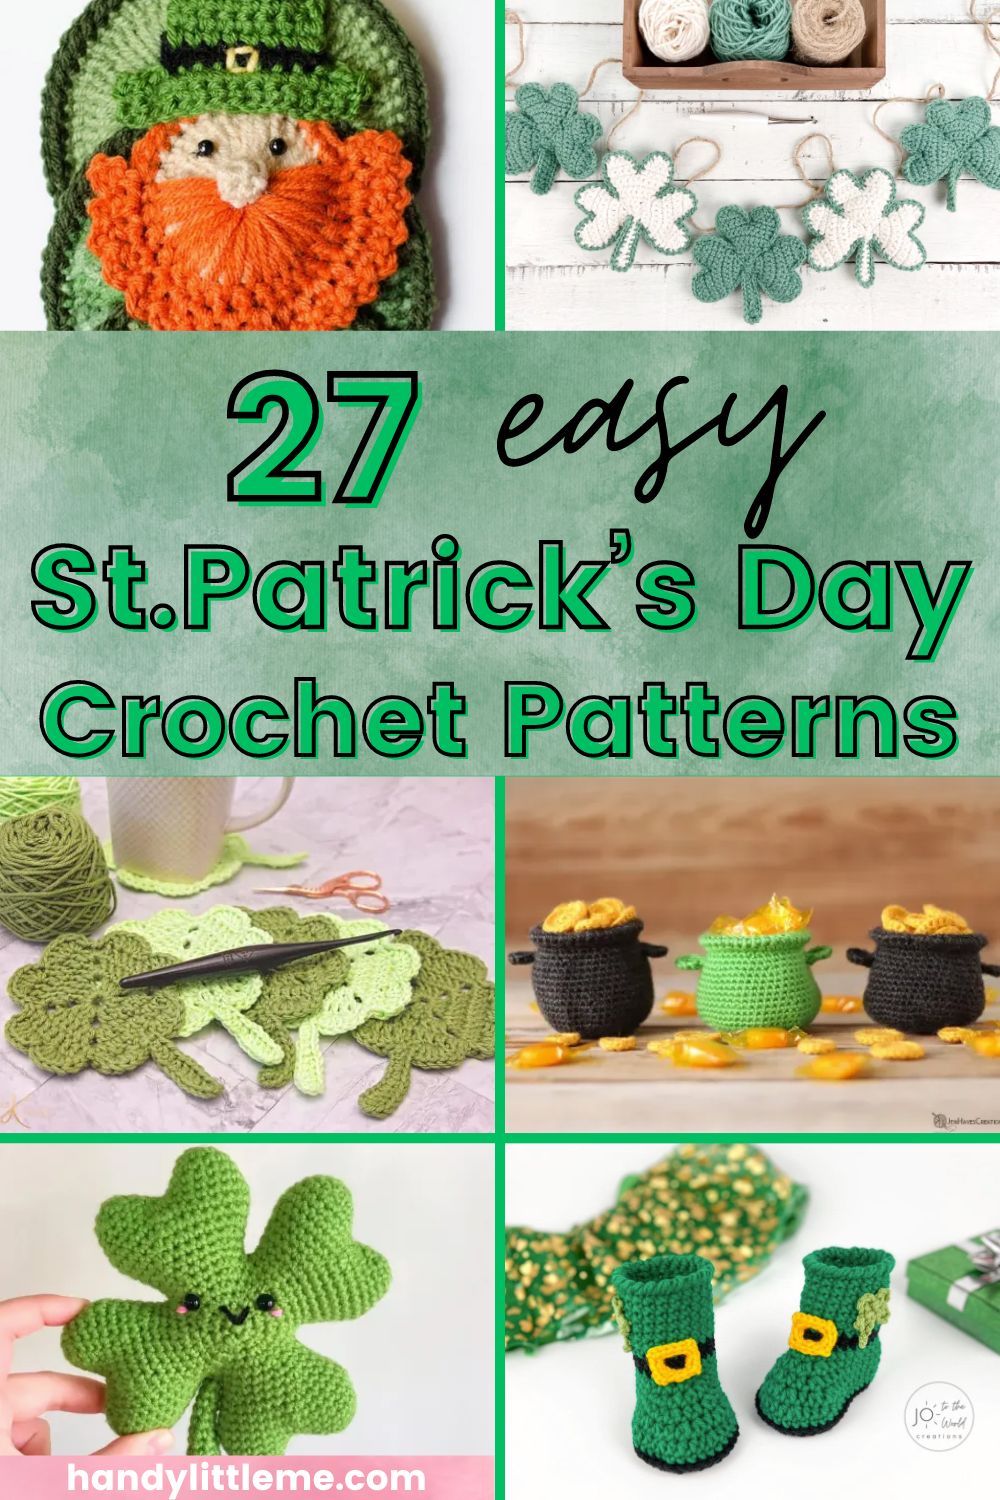 22 Free Crochet Patterns for Every Skill Level